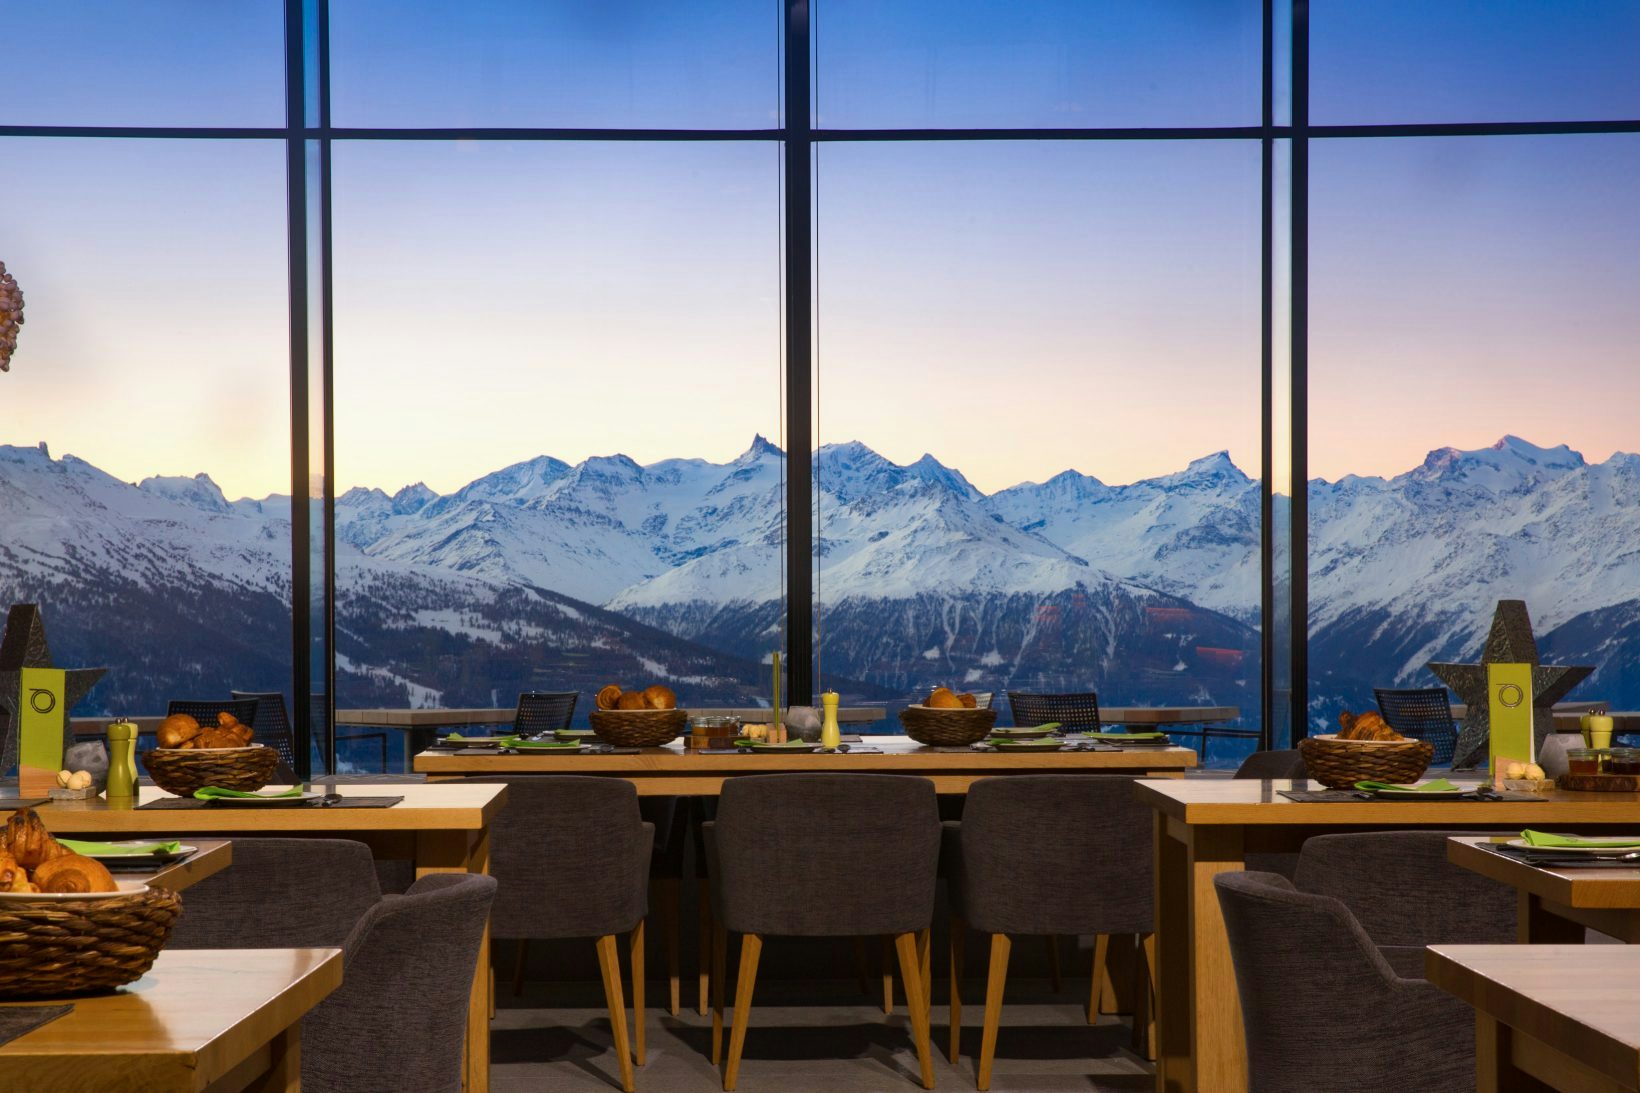 Mountain resorts are aiming for new heights of ultra-luxury